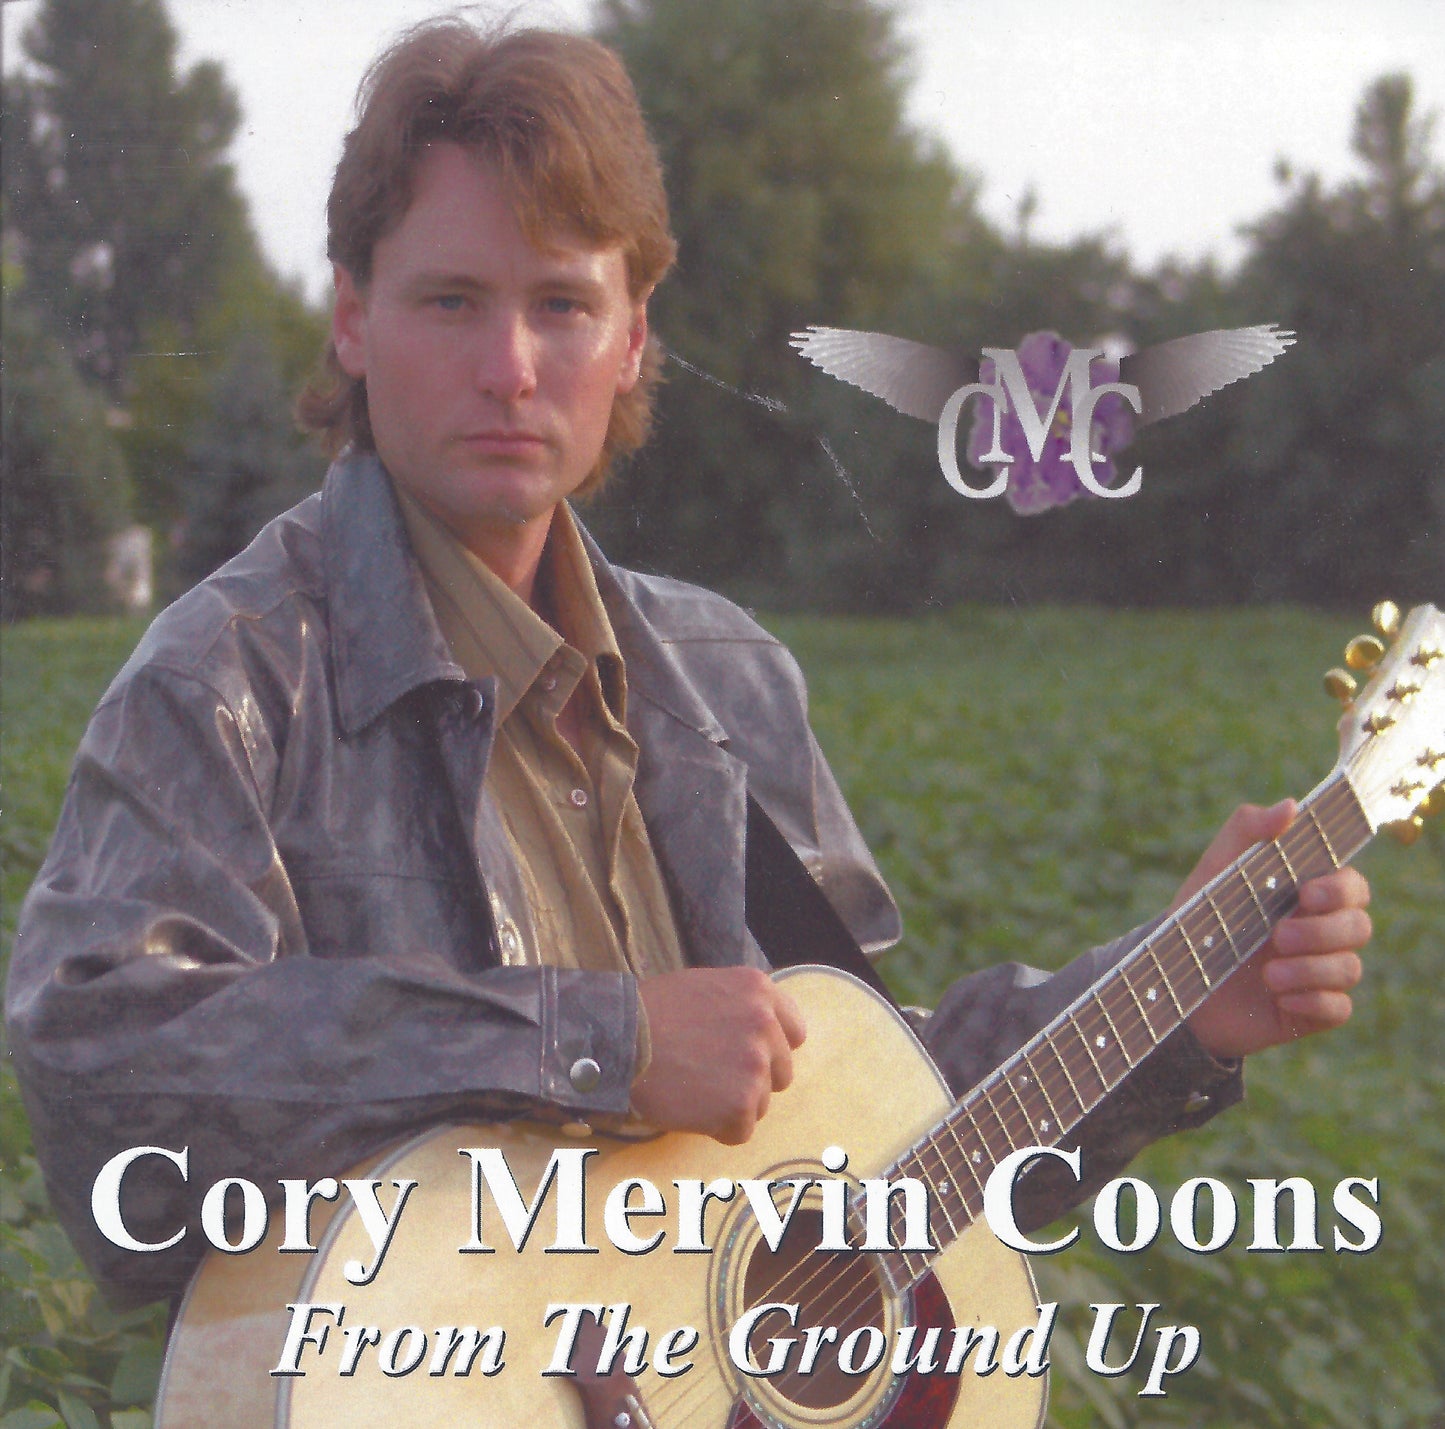 Old Man Plays On - Cory Mervin Coons